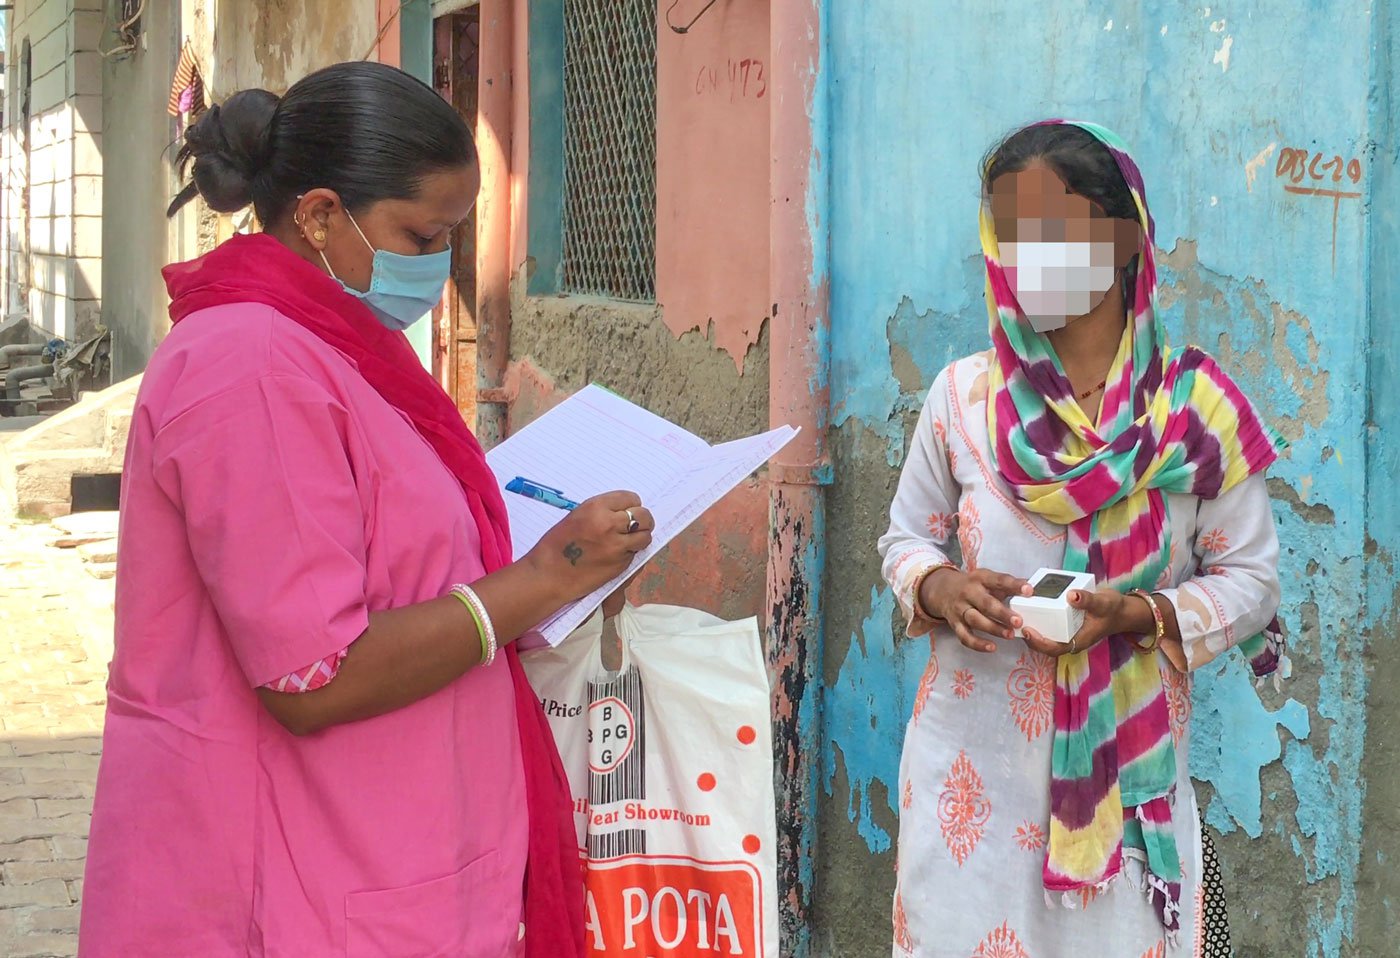 'We hear many women complaining about copper-T', says ASHA worker Sushila Devi; here she is checking Deepa's oxygen reading weeks after she tested positive for Covid-19 while still enduring the discomfort of the copper-T